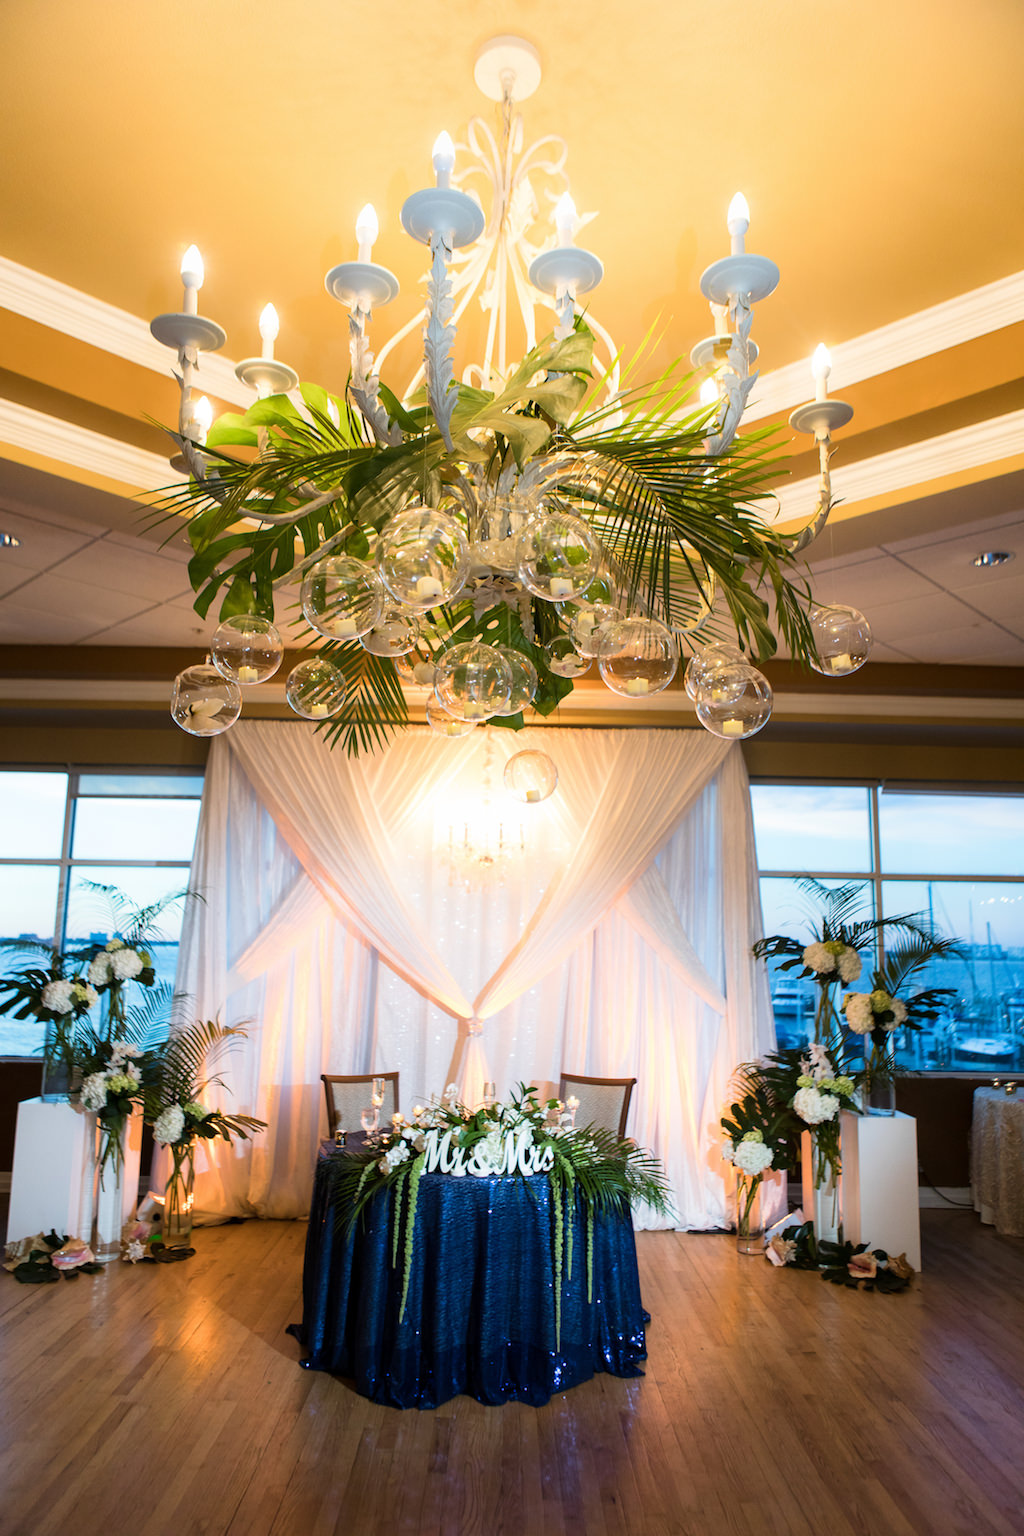 Classic Traditional Tropical Inspired Ballroom Wedding Reception Decor, White Chandelier with Hanging Clear Glass Balls, Palm Tree Leaves, Sweetheart Table with Sparkle Blue Tablecloth, Green Hanging Amaranthus, White Mr and Mrs Sign, White Drapery Backdrop, White Pedestals with Tropical Floral Bouquets | St. Petersburg Wedding Venue Isla Del Sol Yacht and Country Club